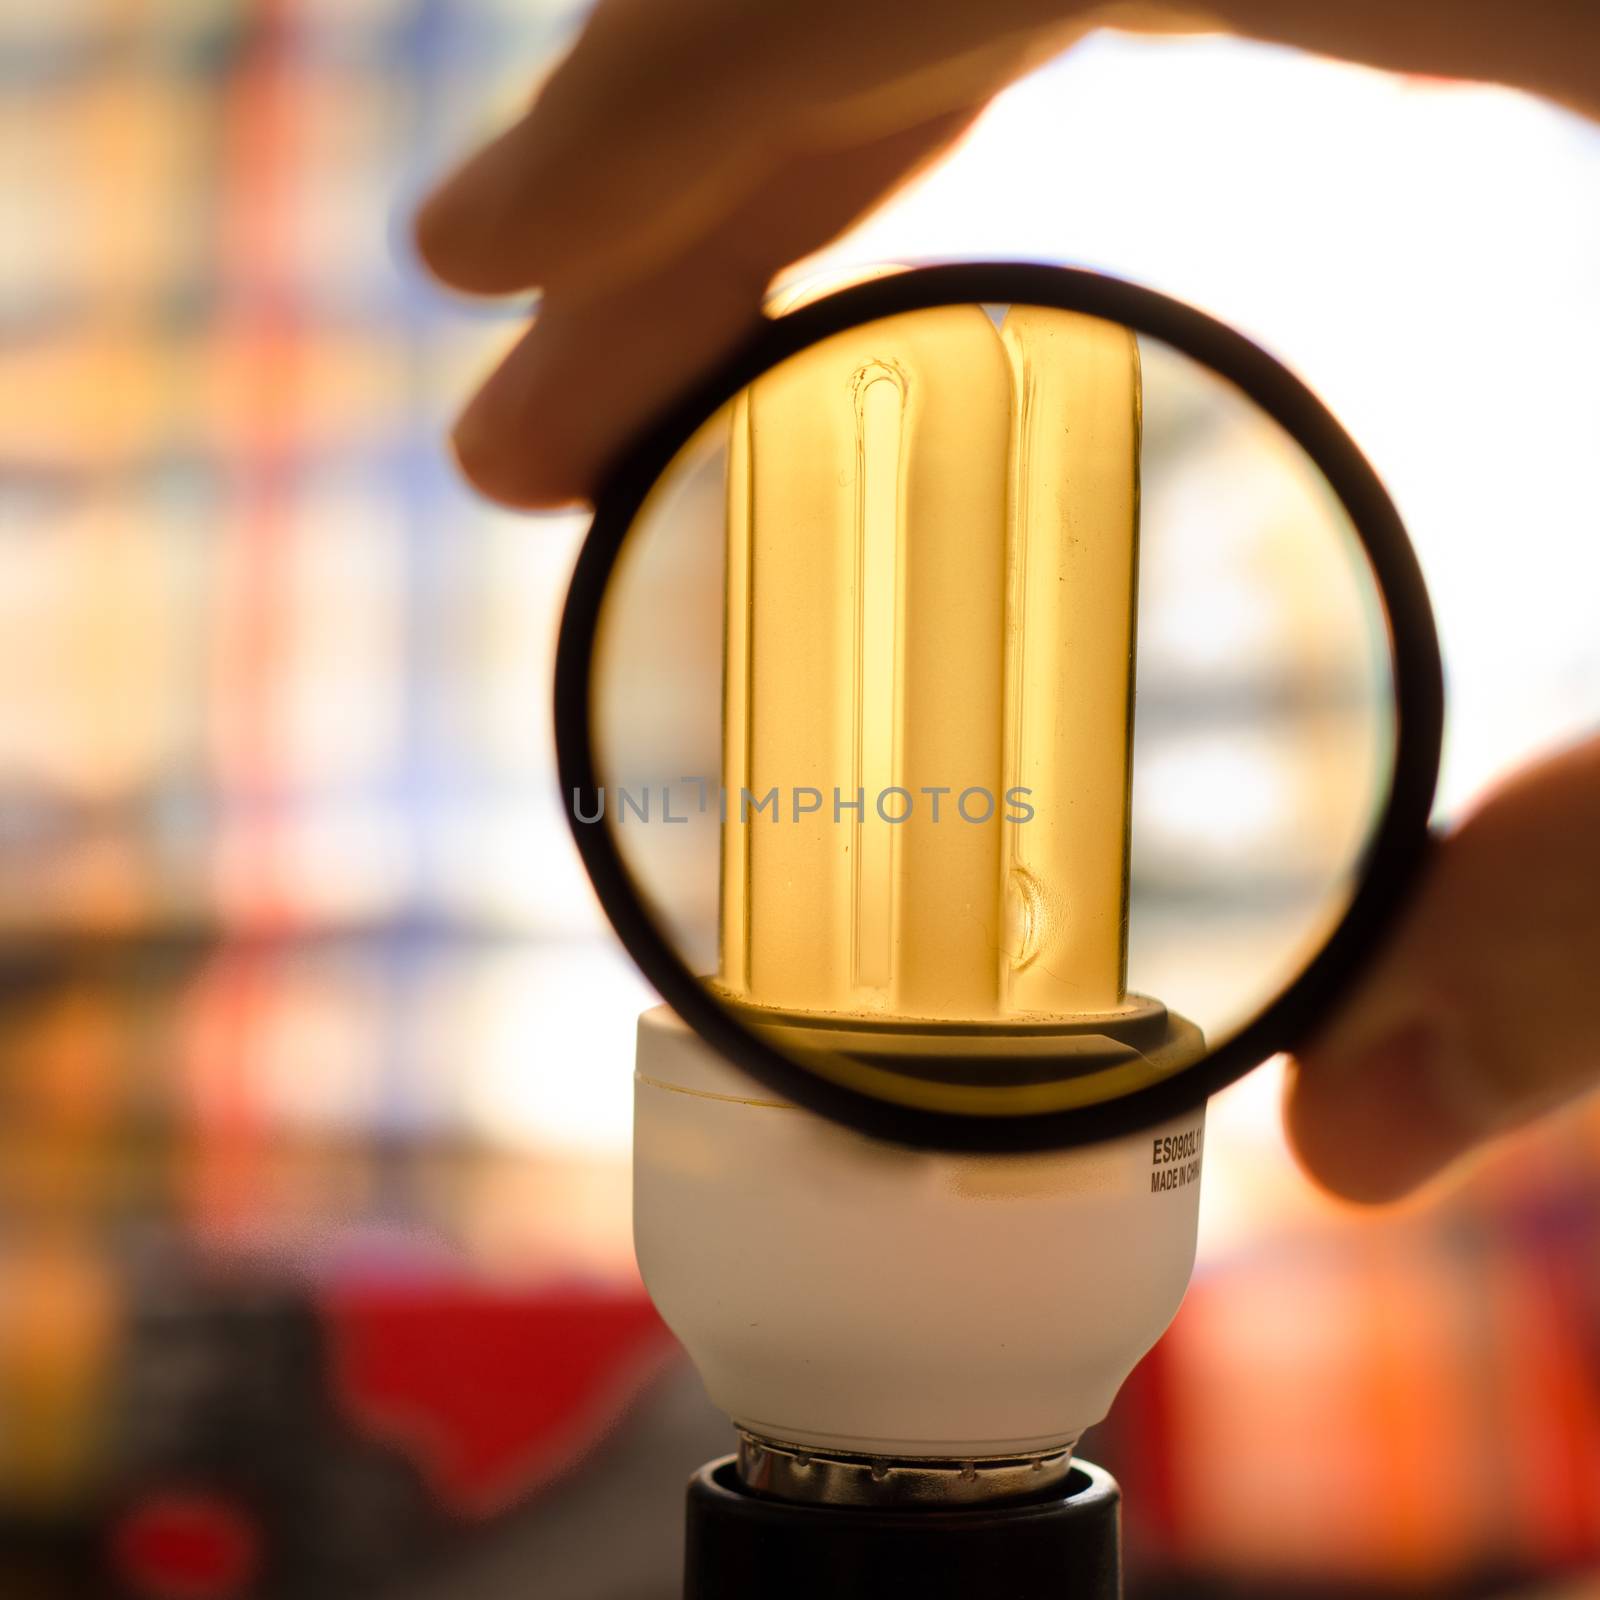 Lens neutral density filter before swithed led bulb by mikelju